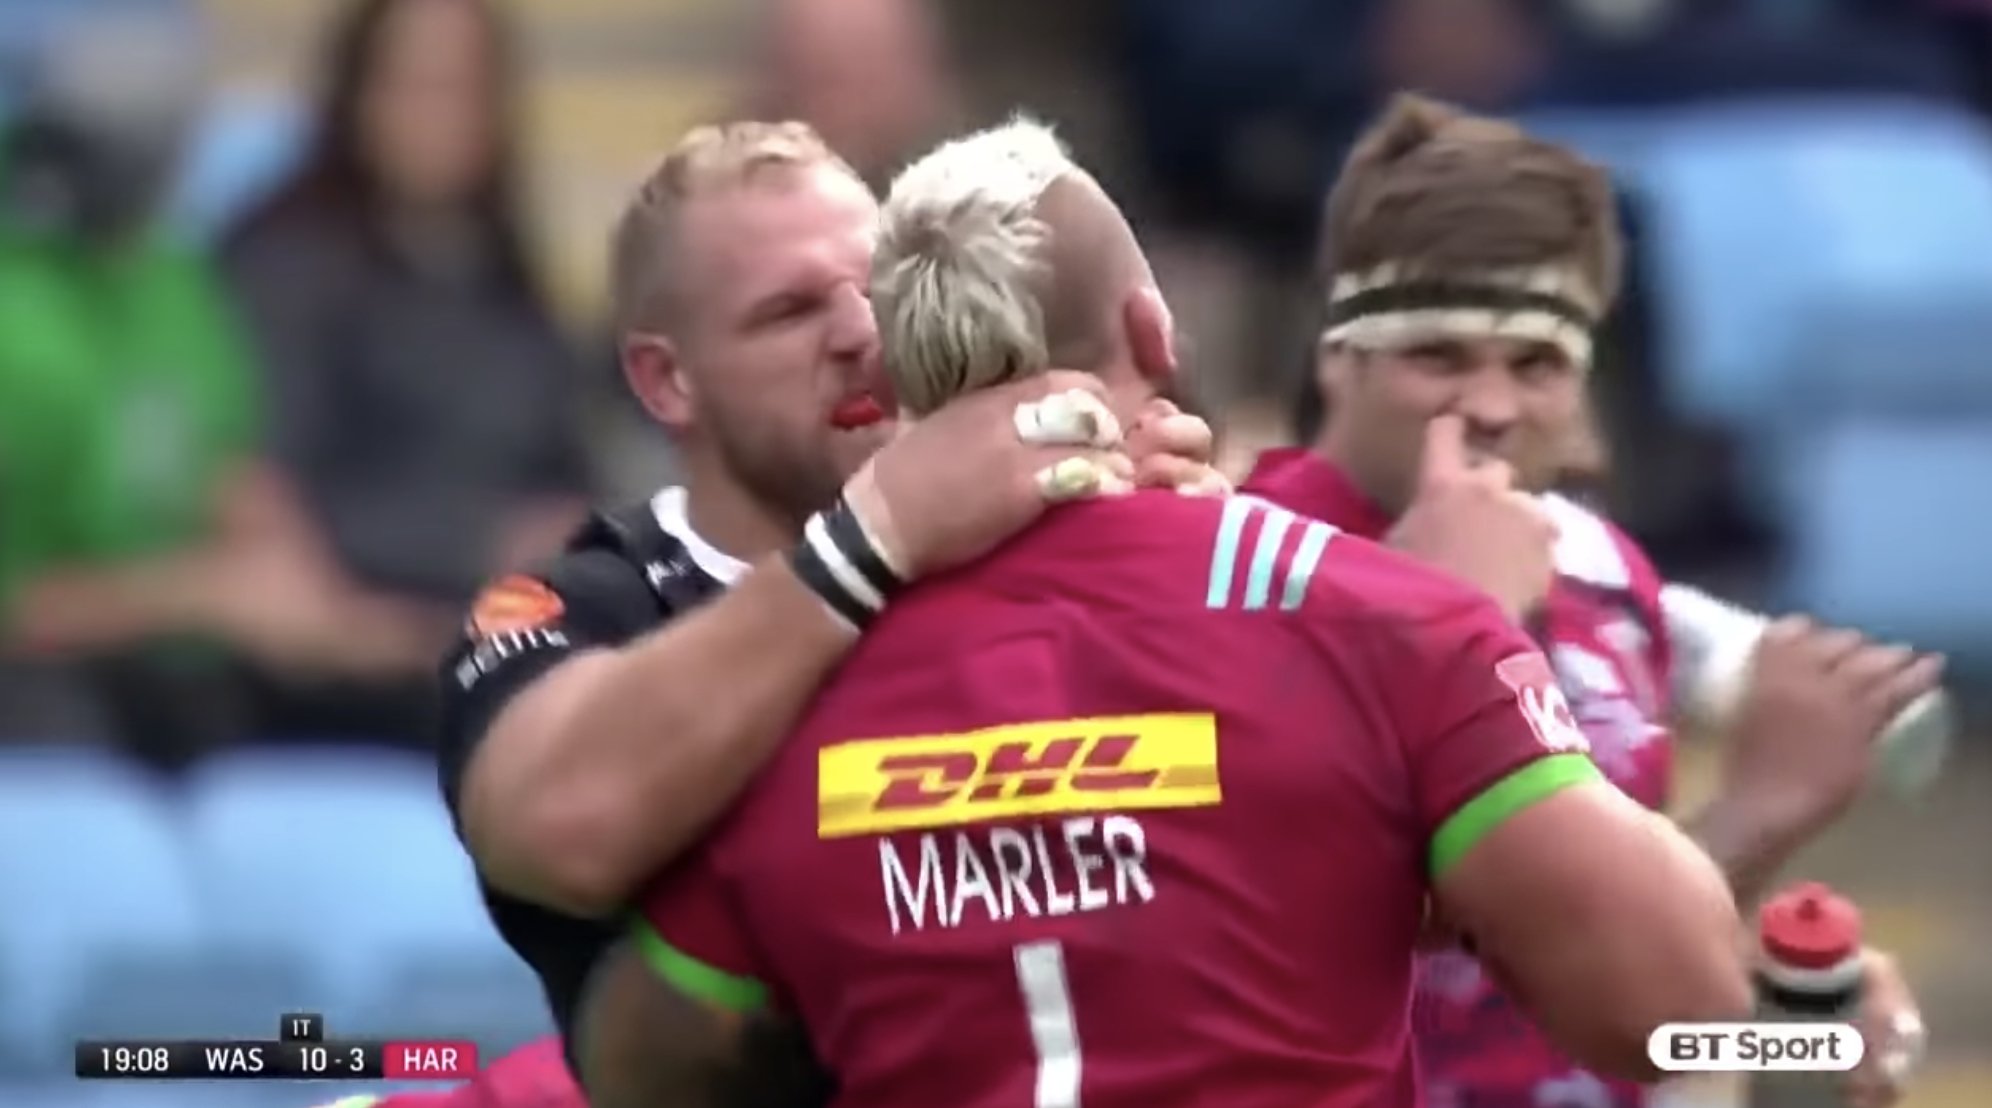 VIDEO: New  video compilation paints James Haskell as an utter THUG - Make of it what you will